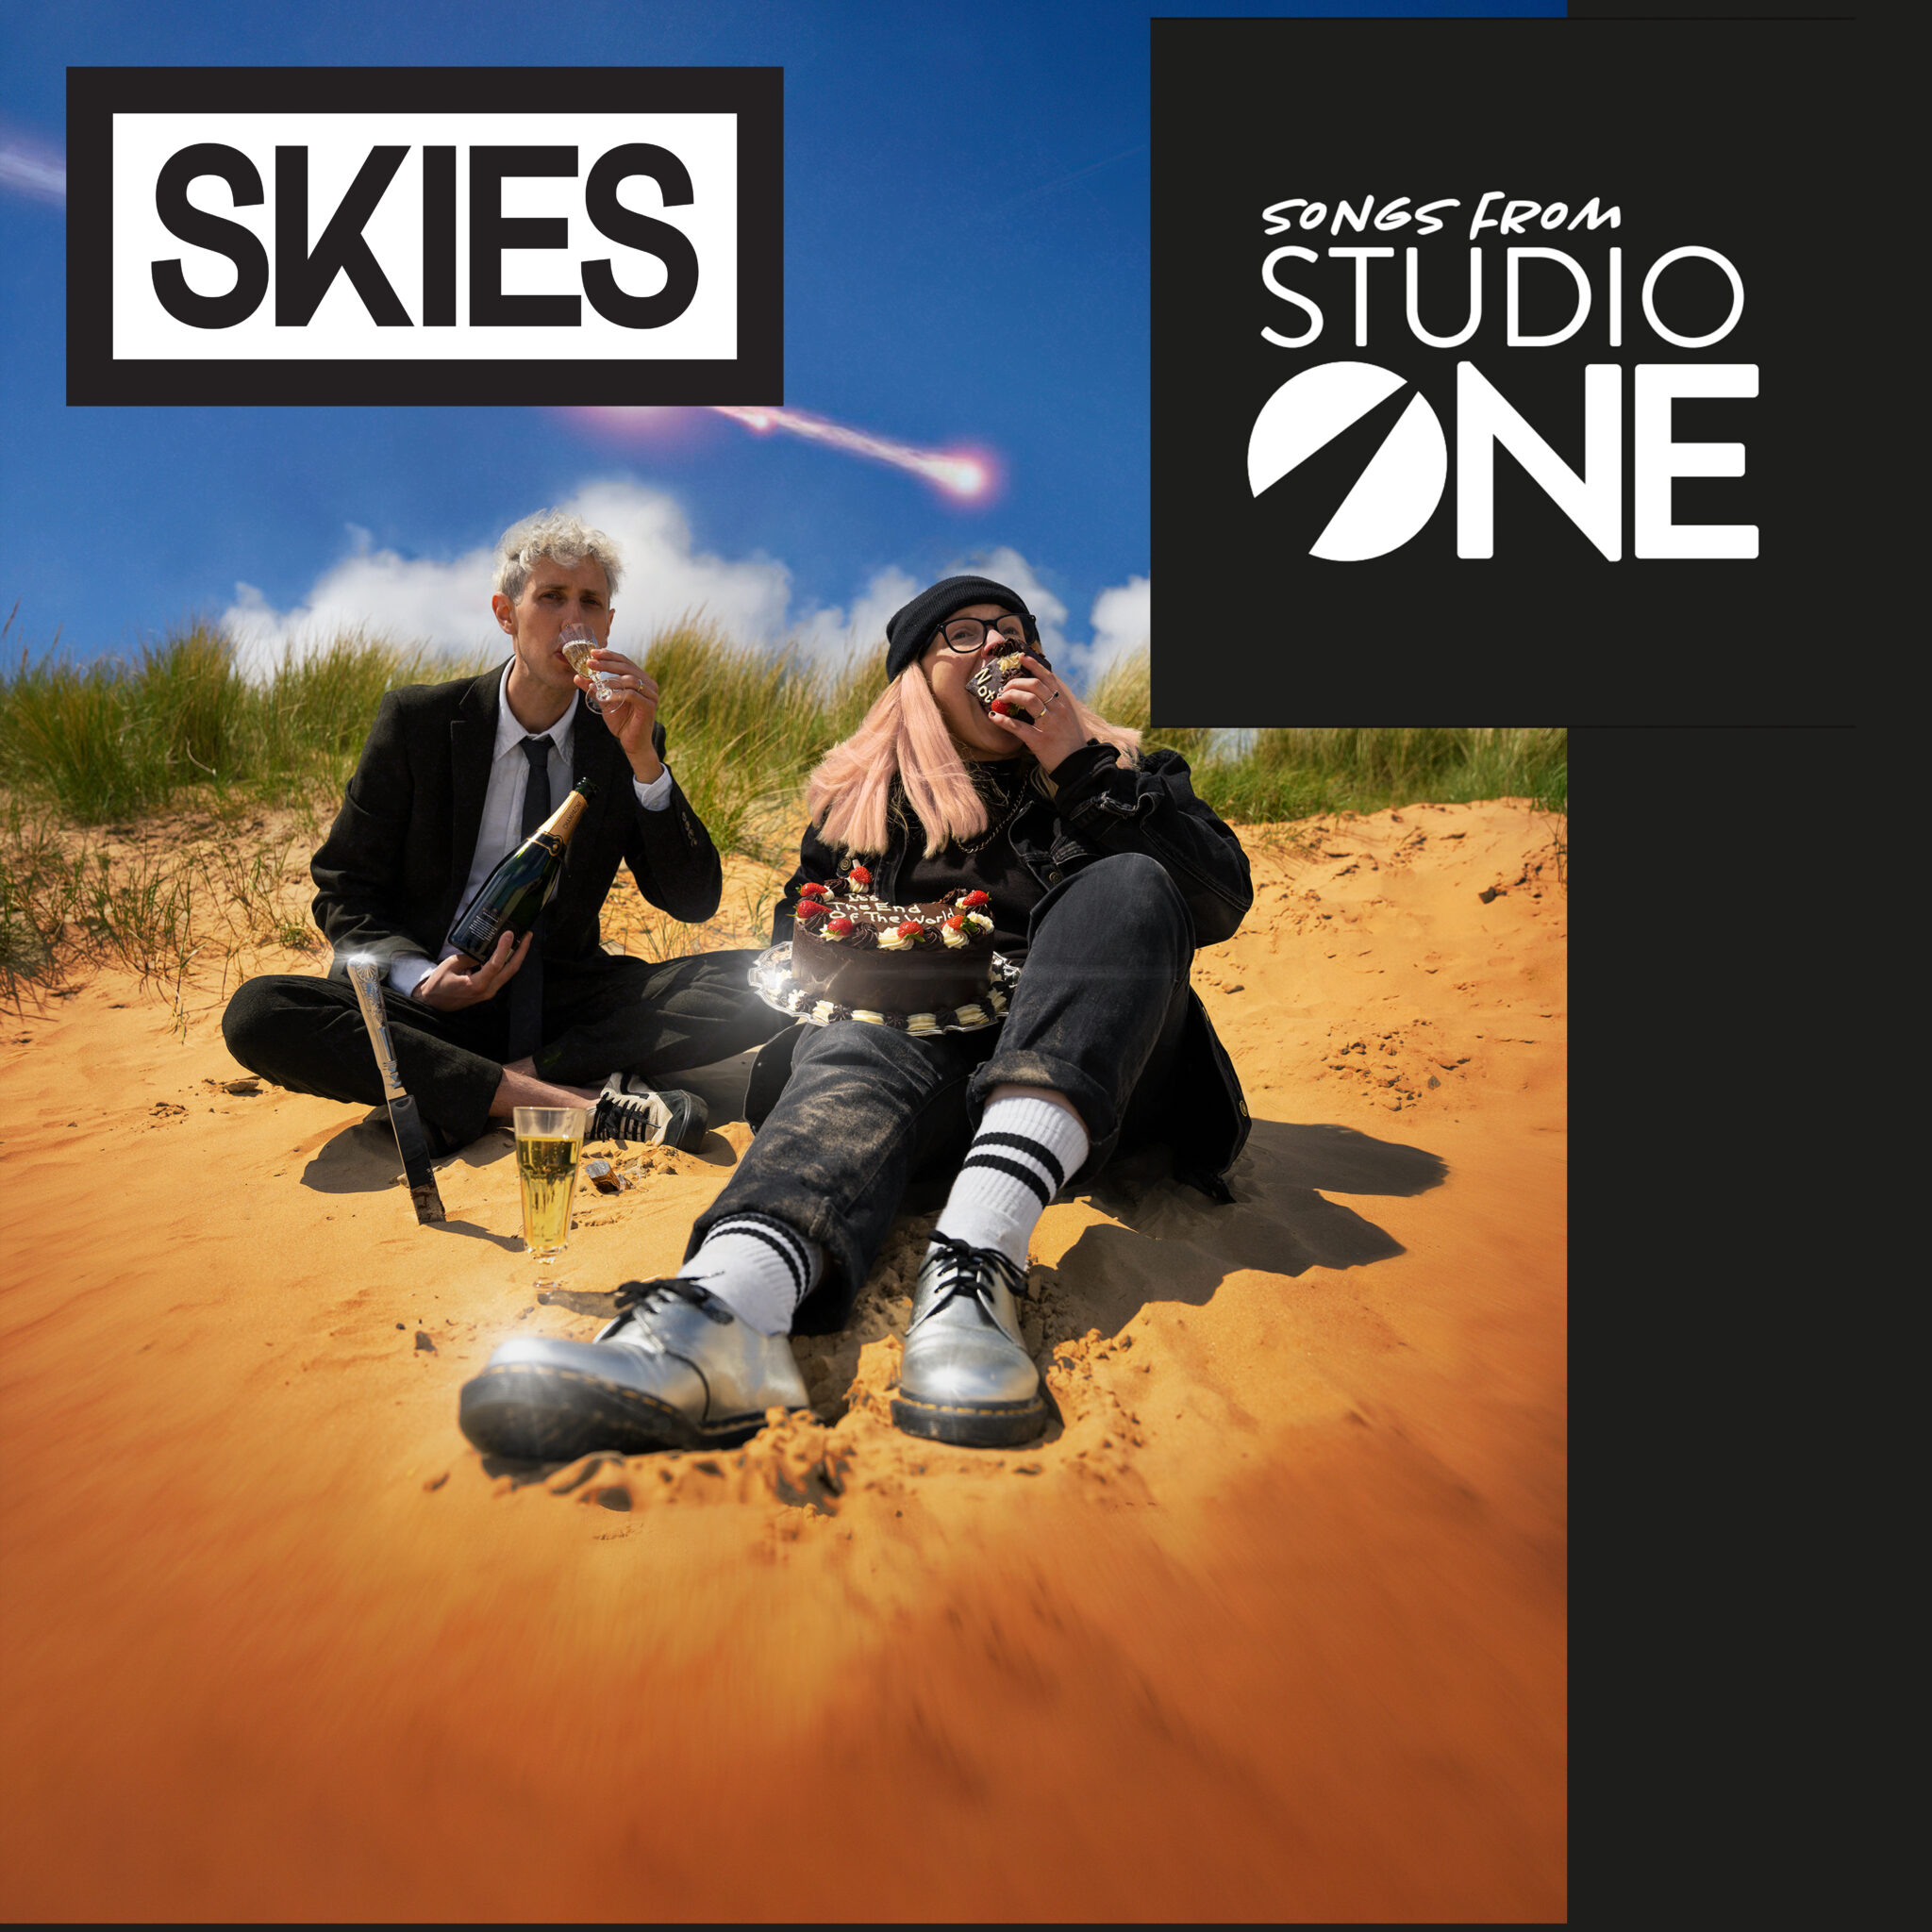 Songs From Studio One with Skies